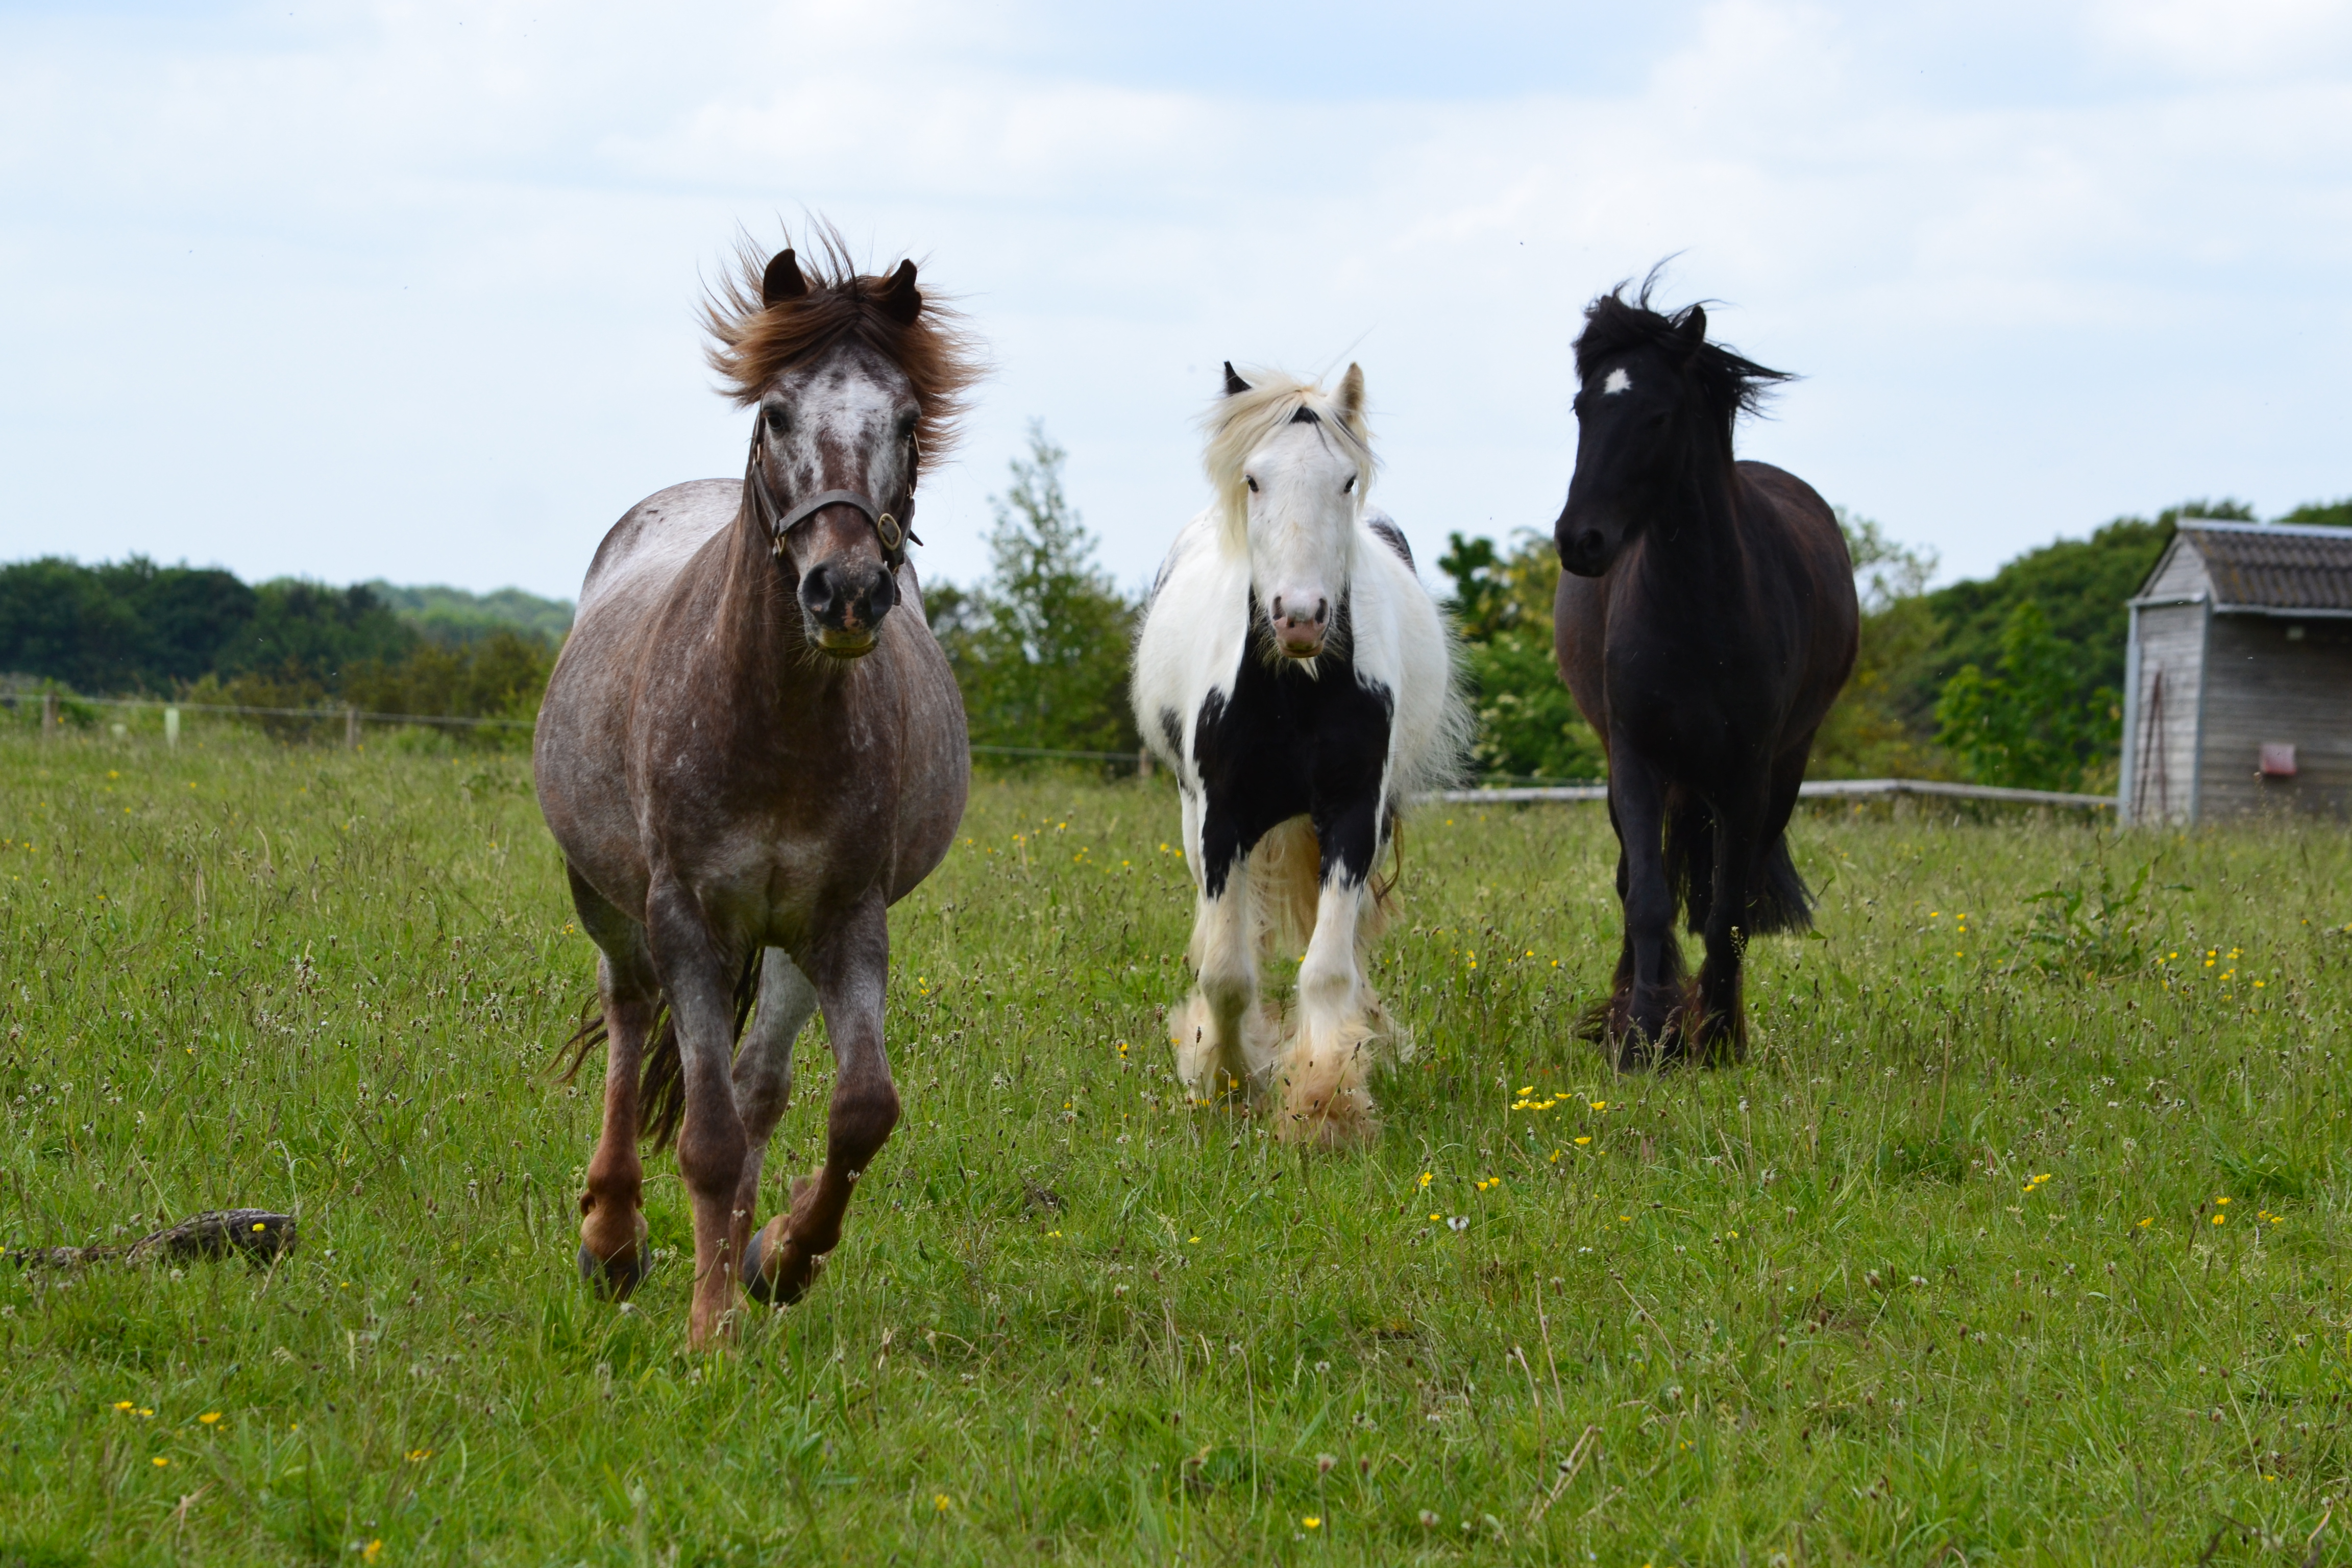 Strawberry roan pony Barley gallops through a field with a piebald pony and a black pony